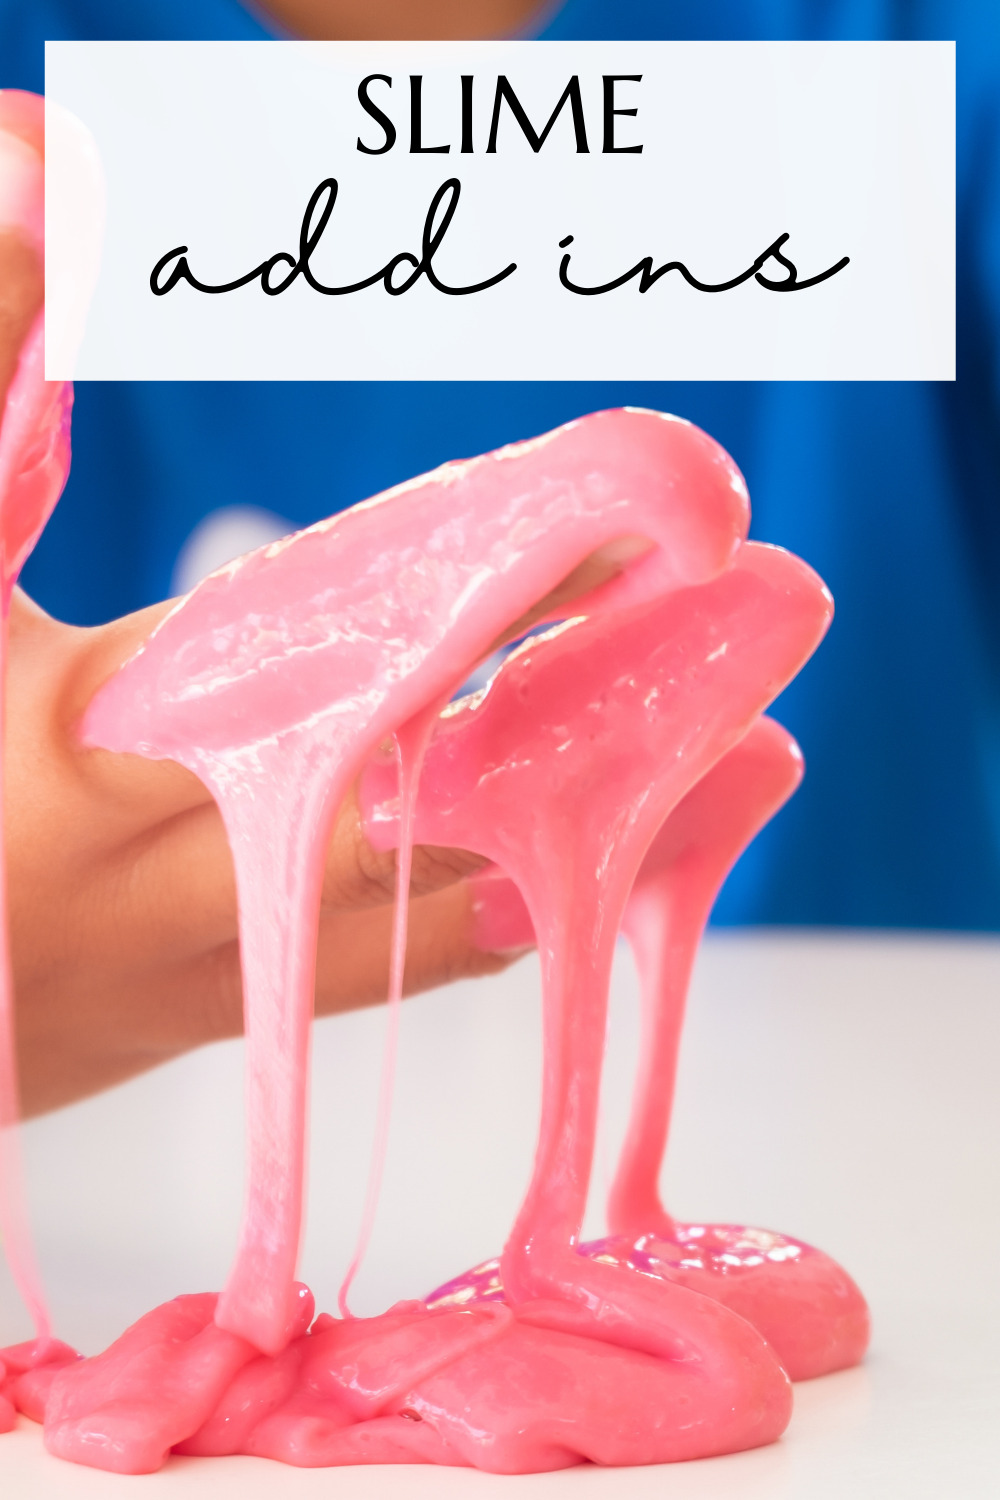 19 Slime Add Ins to Make Your Slime Even Cooler!